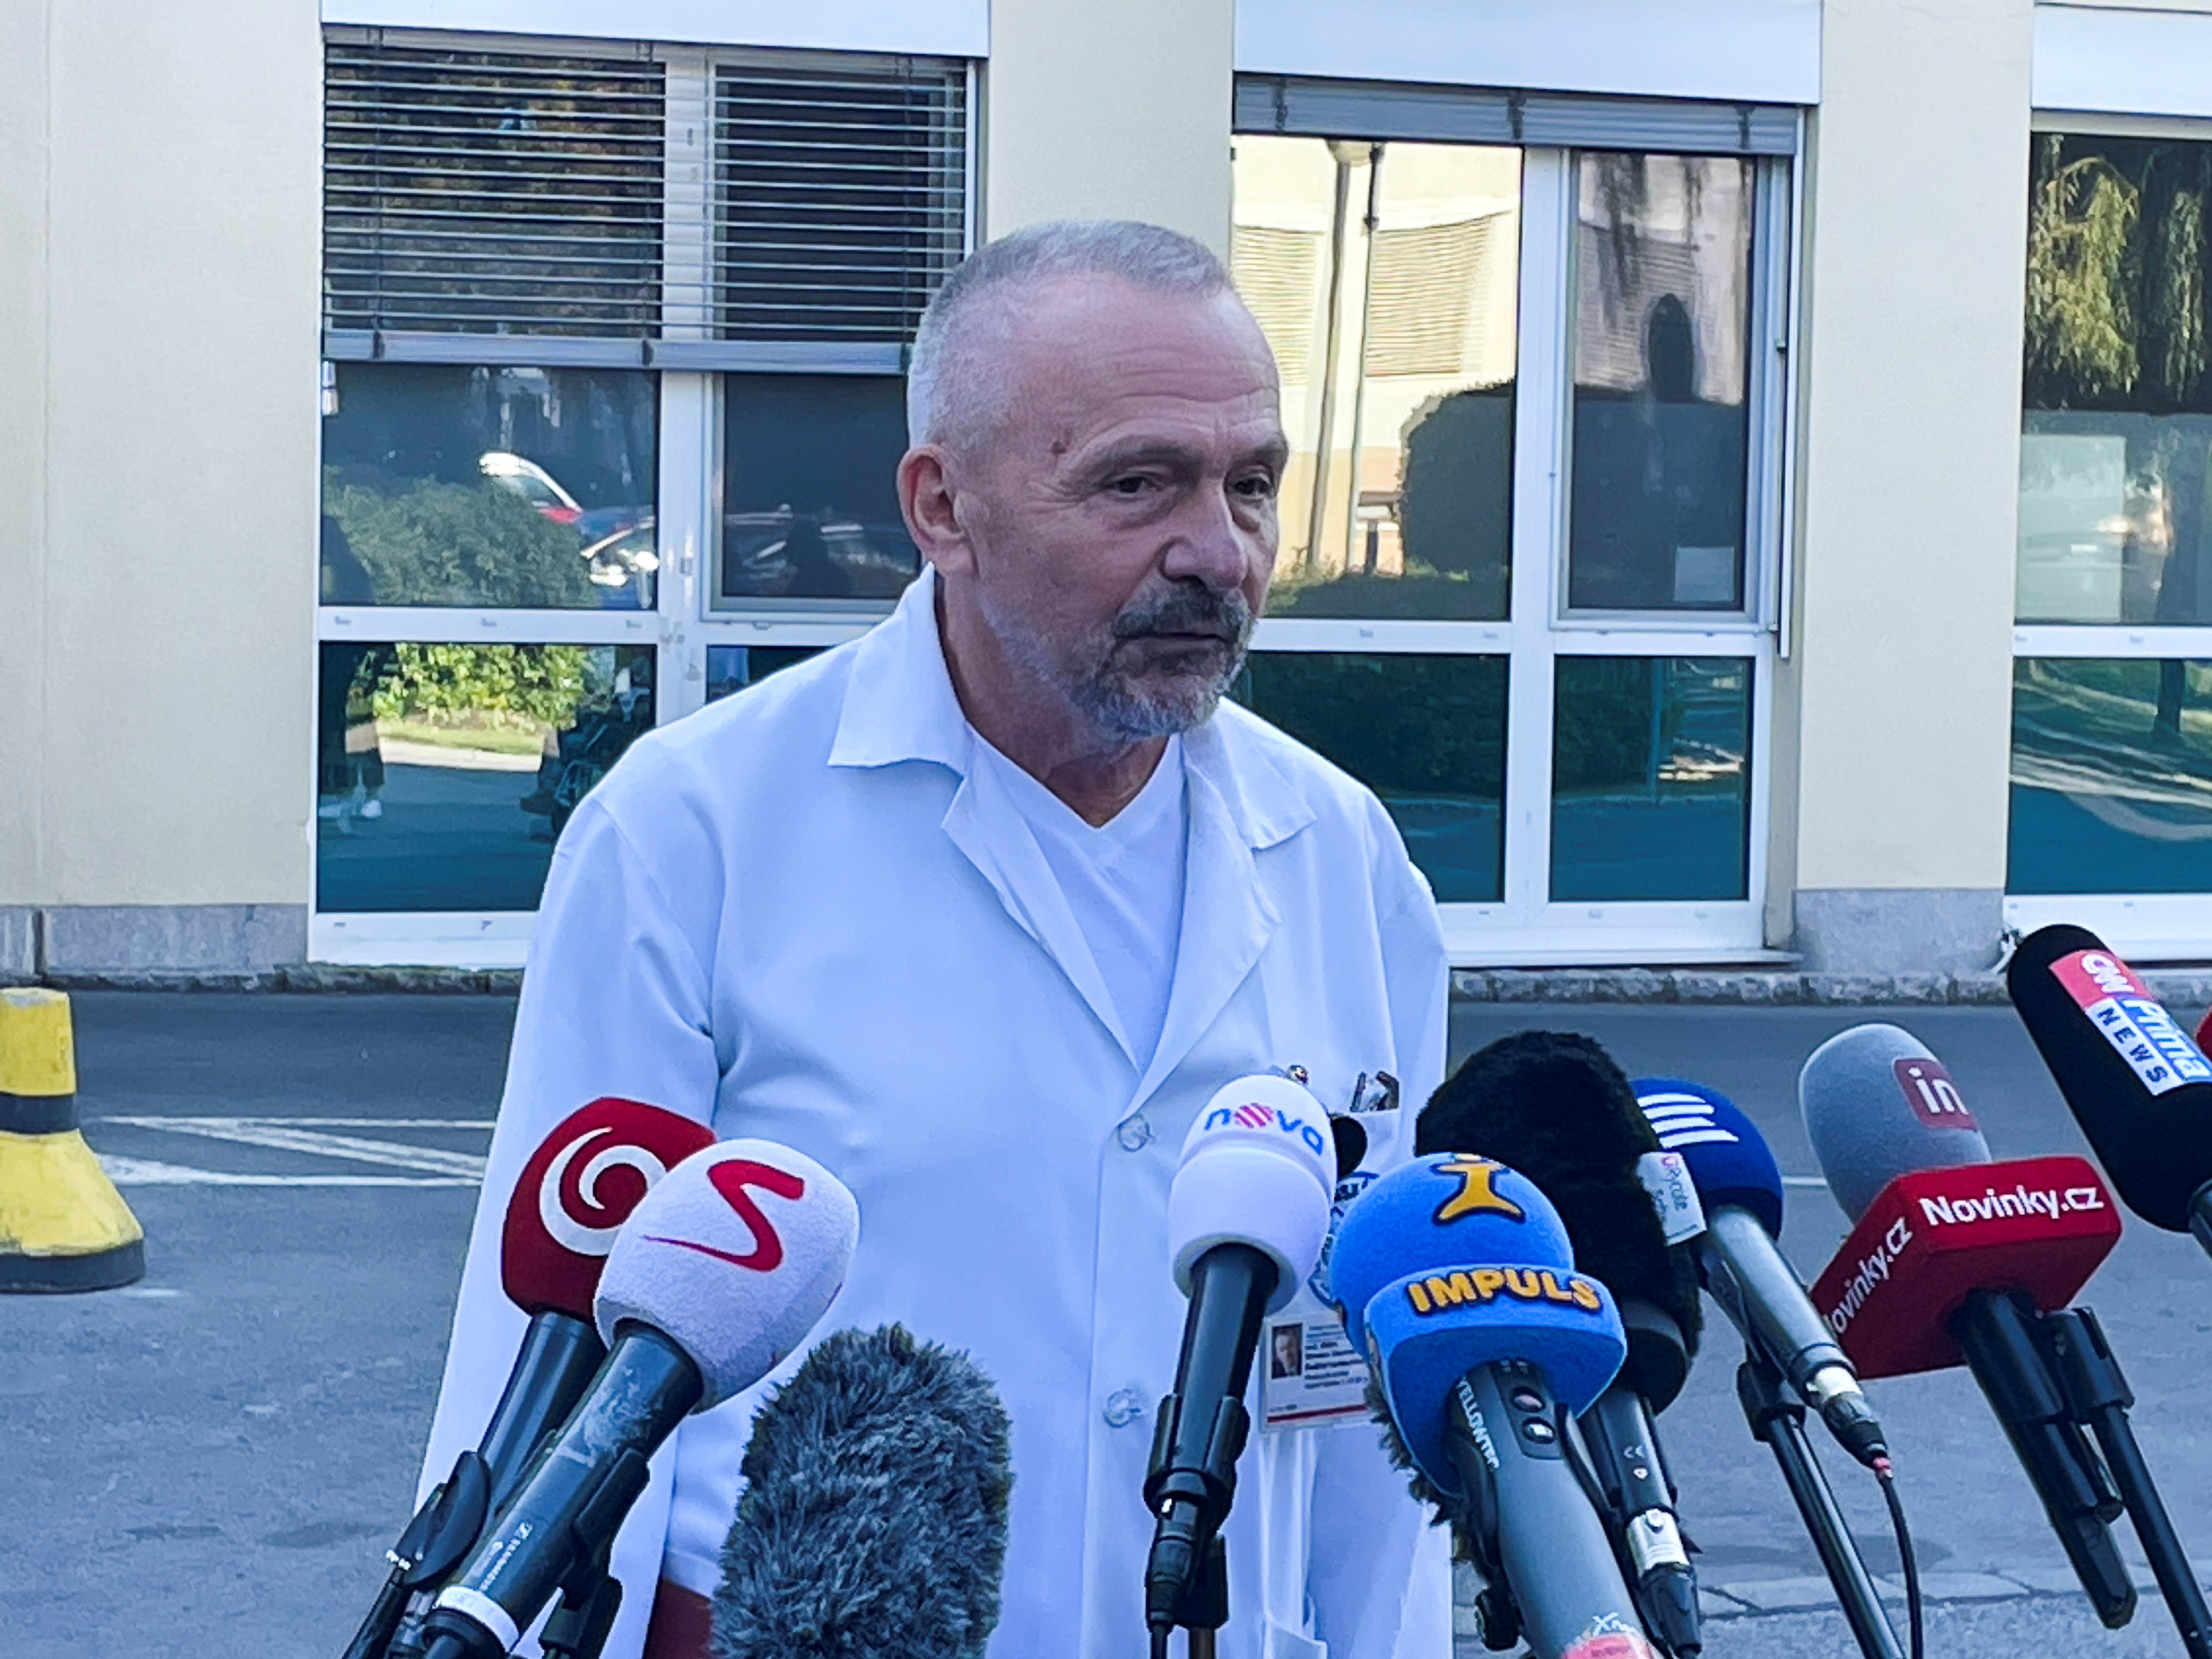 Miroslav Zavoral, director of the Military University Hospital, speaks after Czech president Milos Zeman was admitted to intensive care